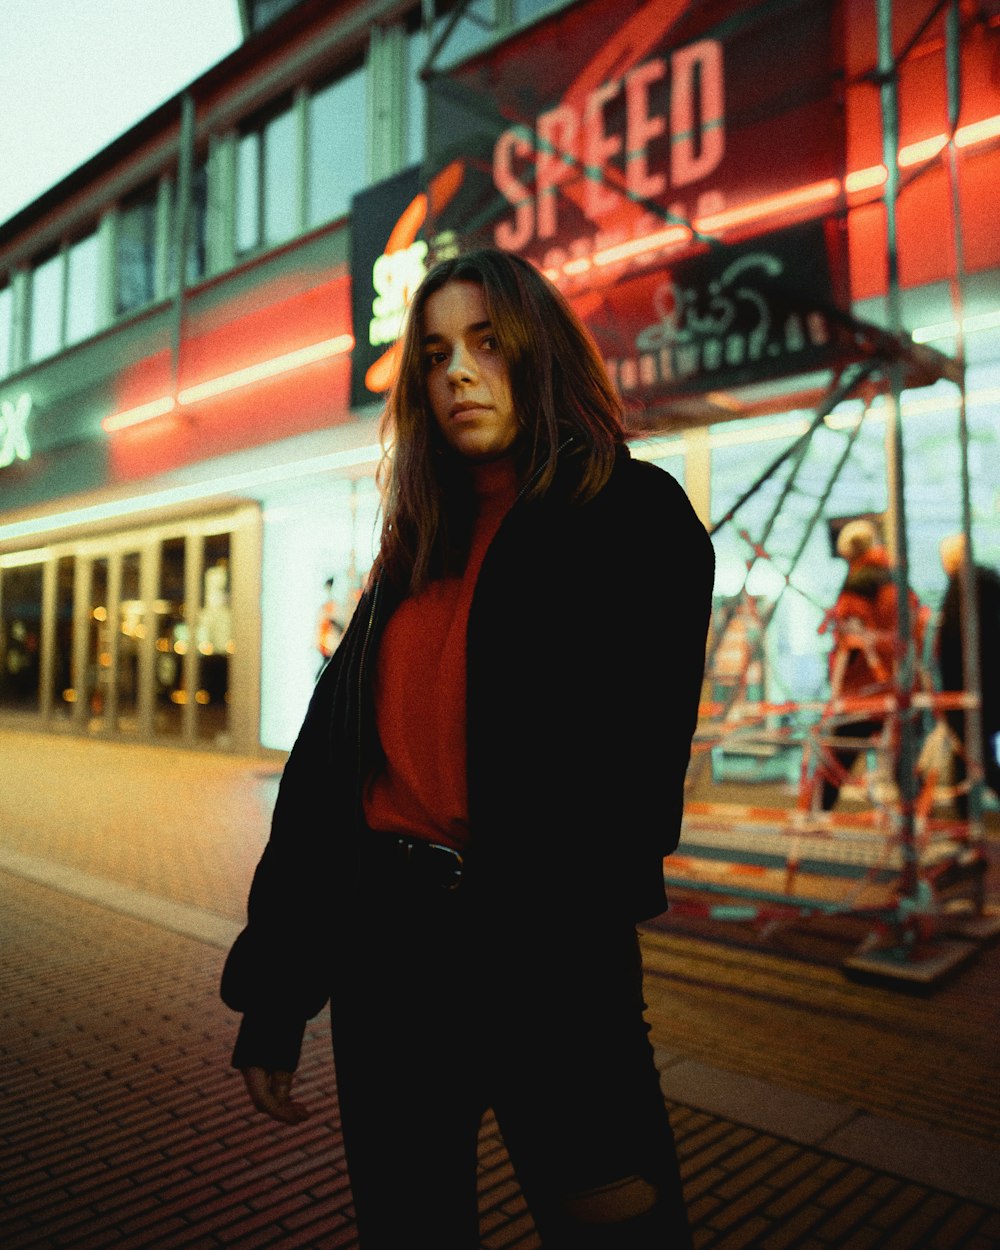 woman in black long sleeve shirt standing near red and white neon signage during night time